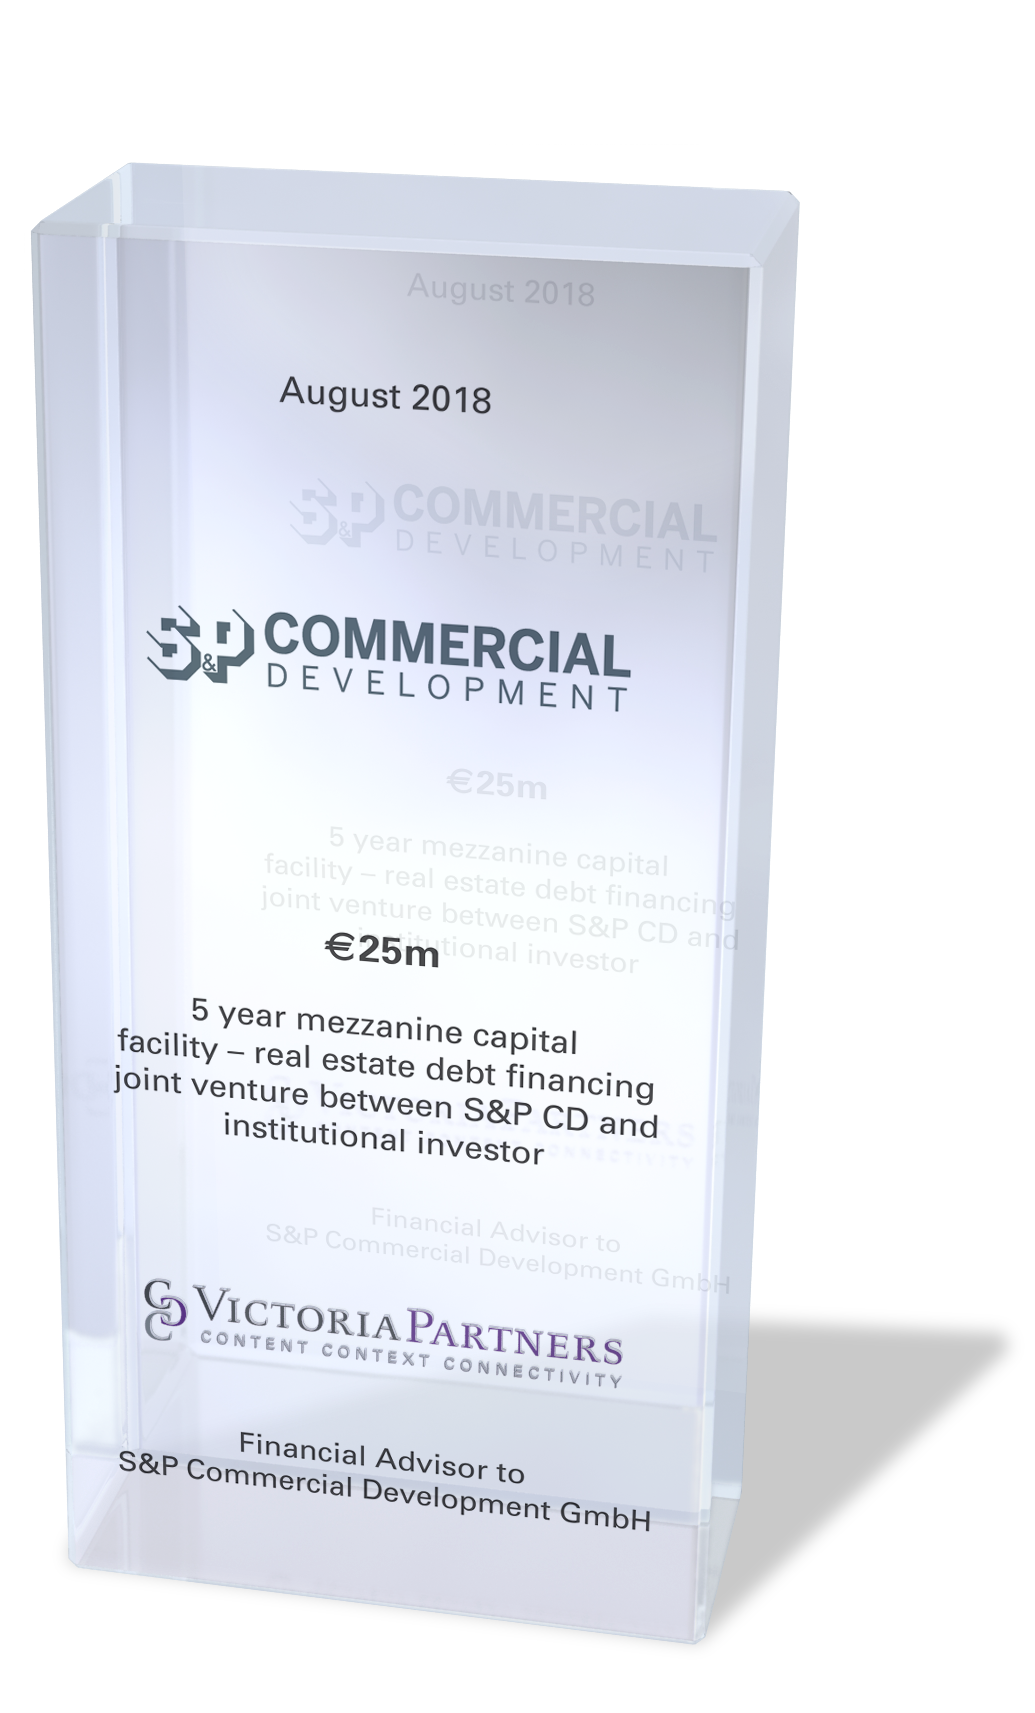 VICTORIAPARTNERS - Financial Advisor to S&P Commercial Development GmbH - August 2018